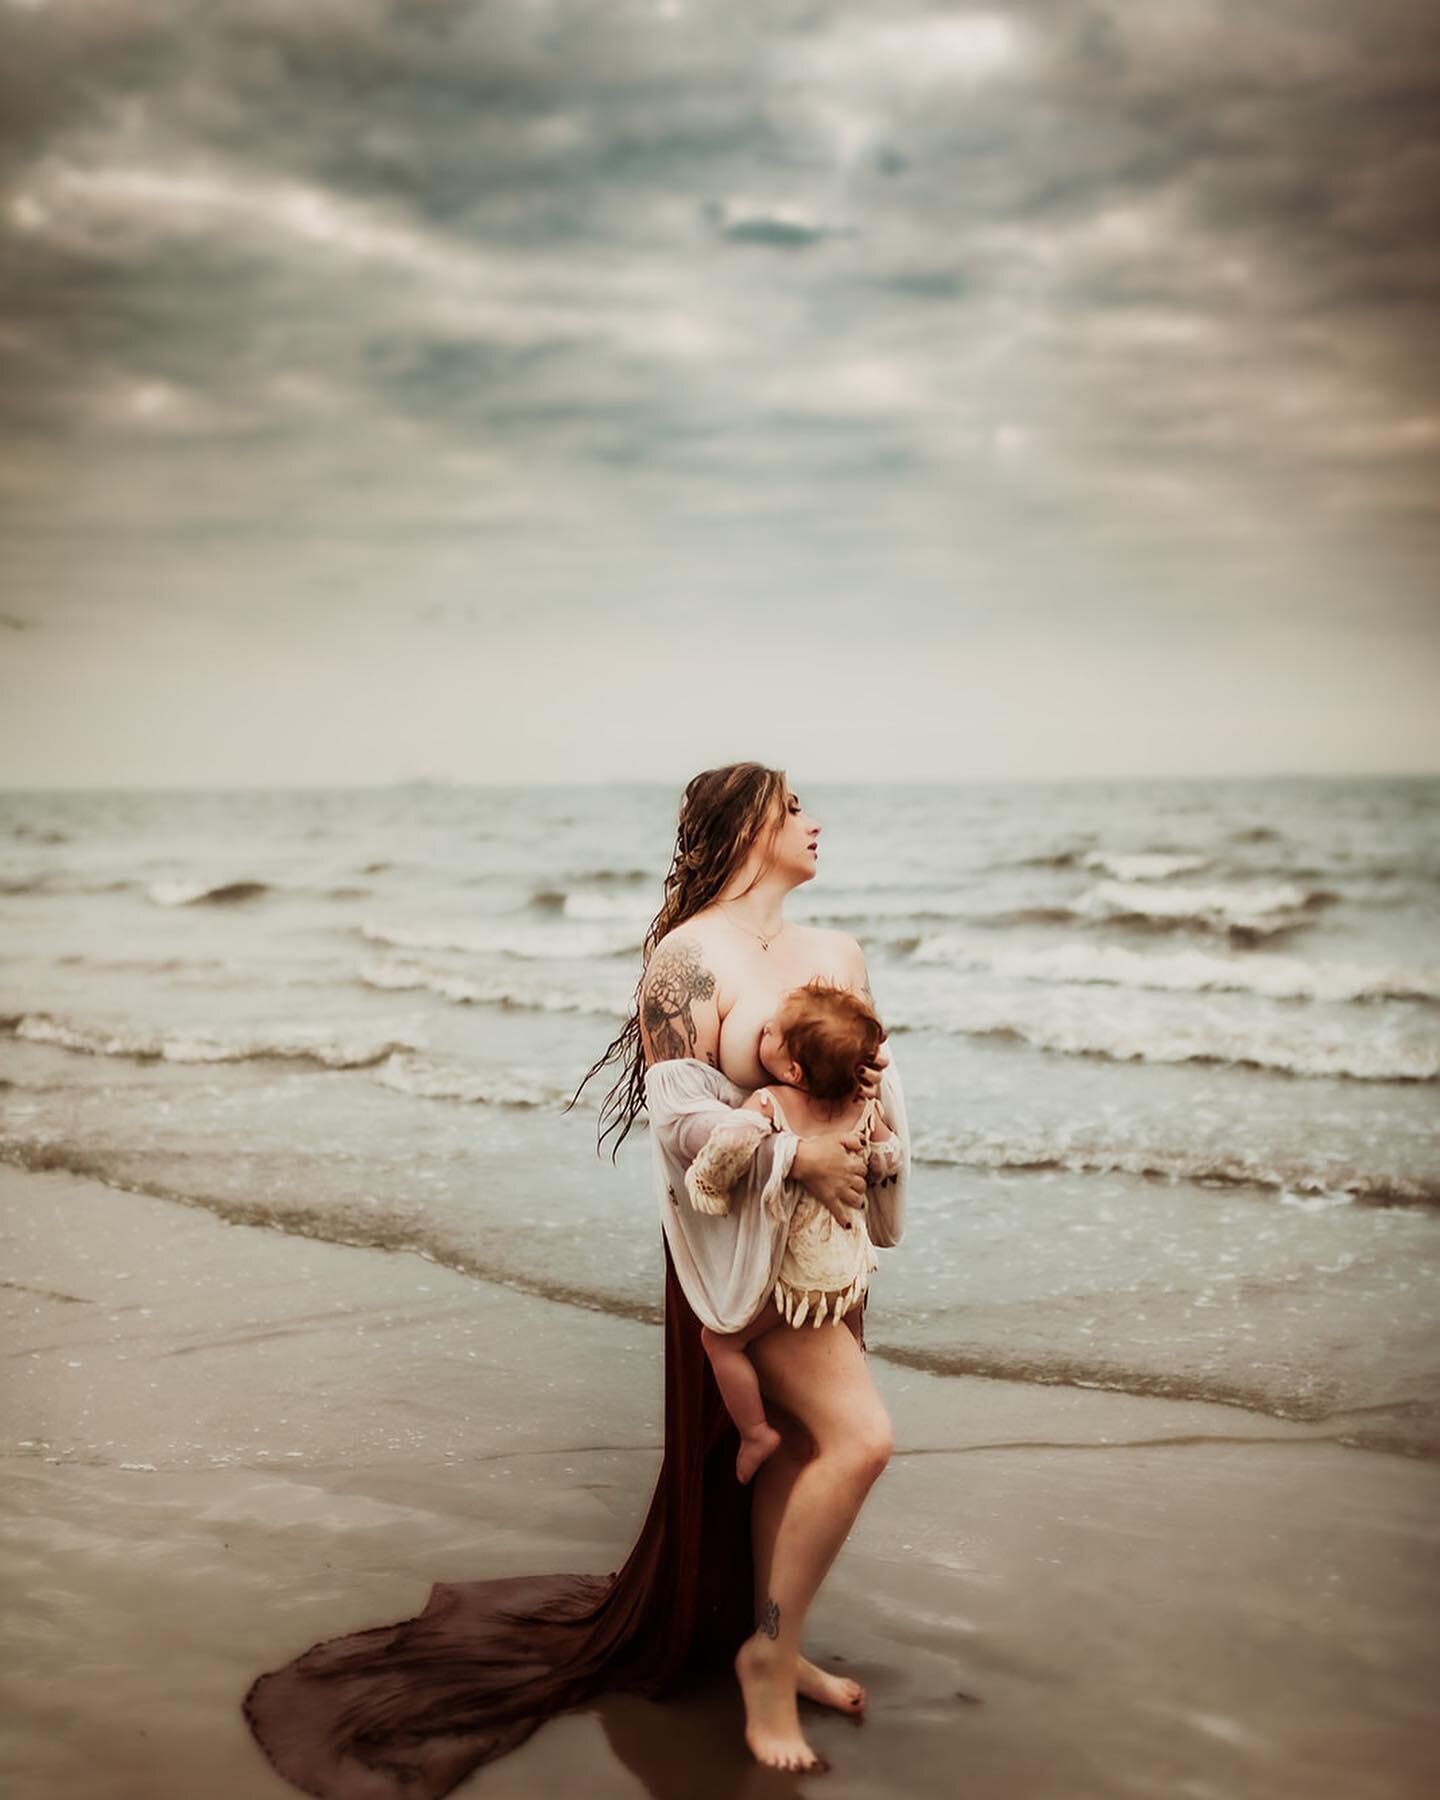 Throwing out a super last min nursing mamas group meet up photography session!! 
 
My Saturday aug 5th session just rescheduled which means an open date to shoot if I have interest:) 

World breastfeeding to honor your journey. Bottle feed exclusivel